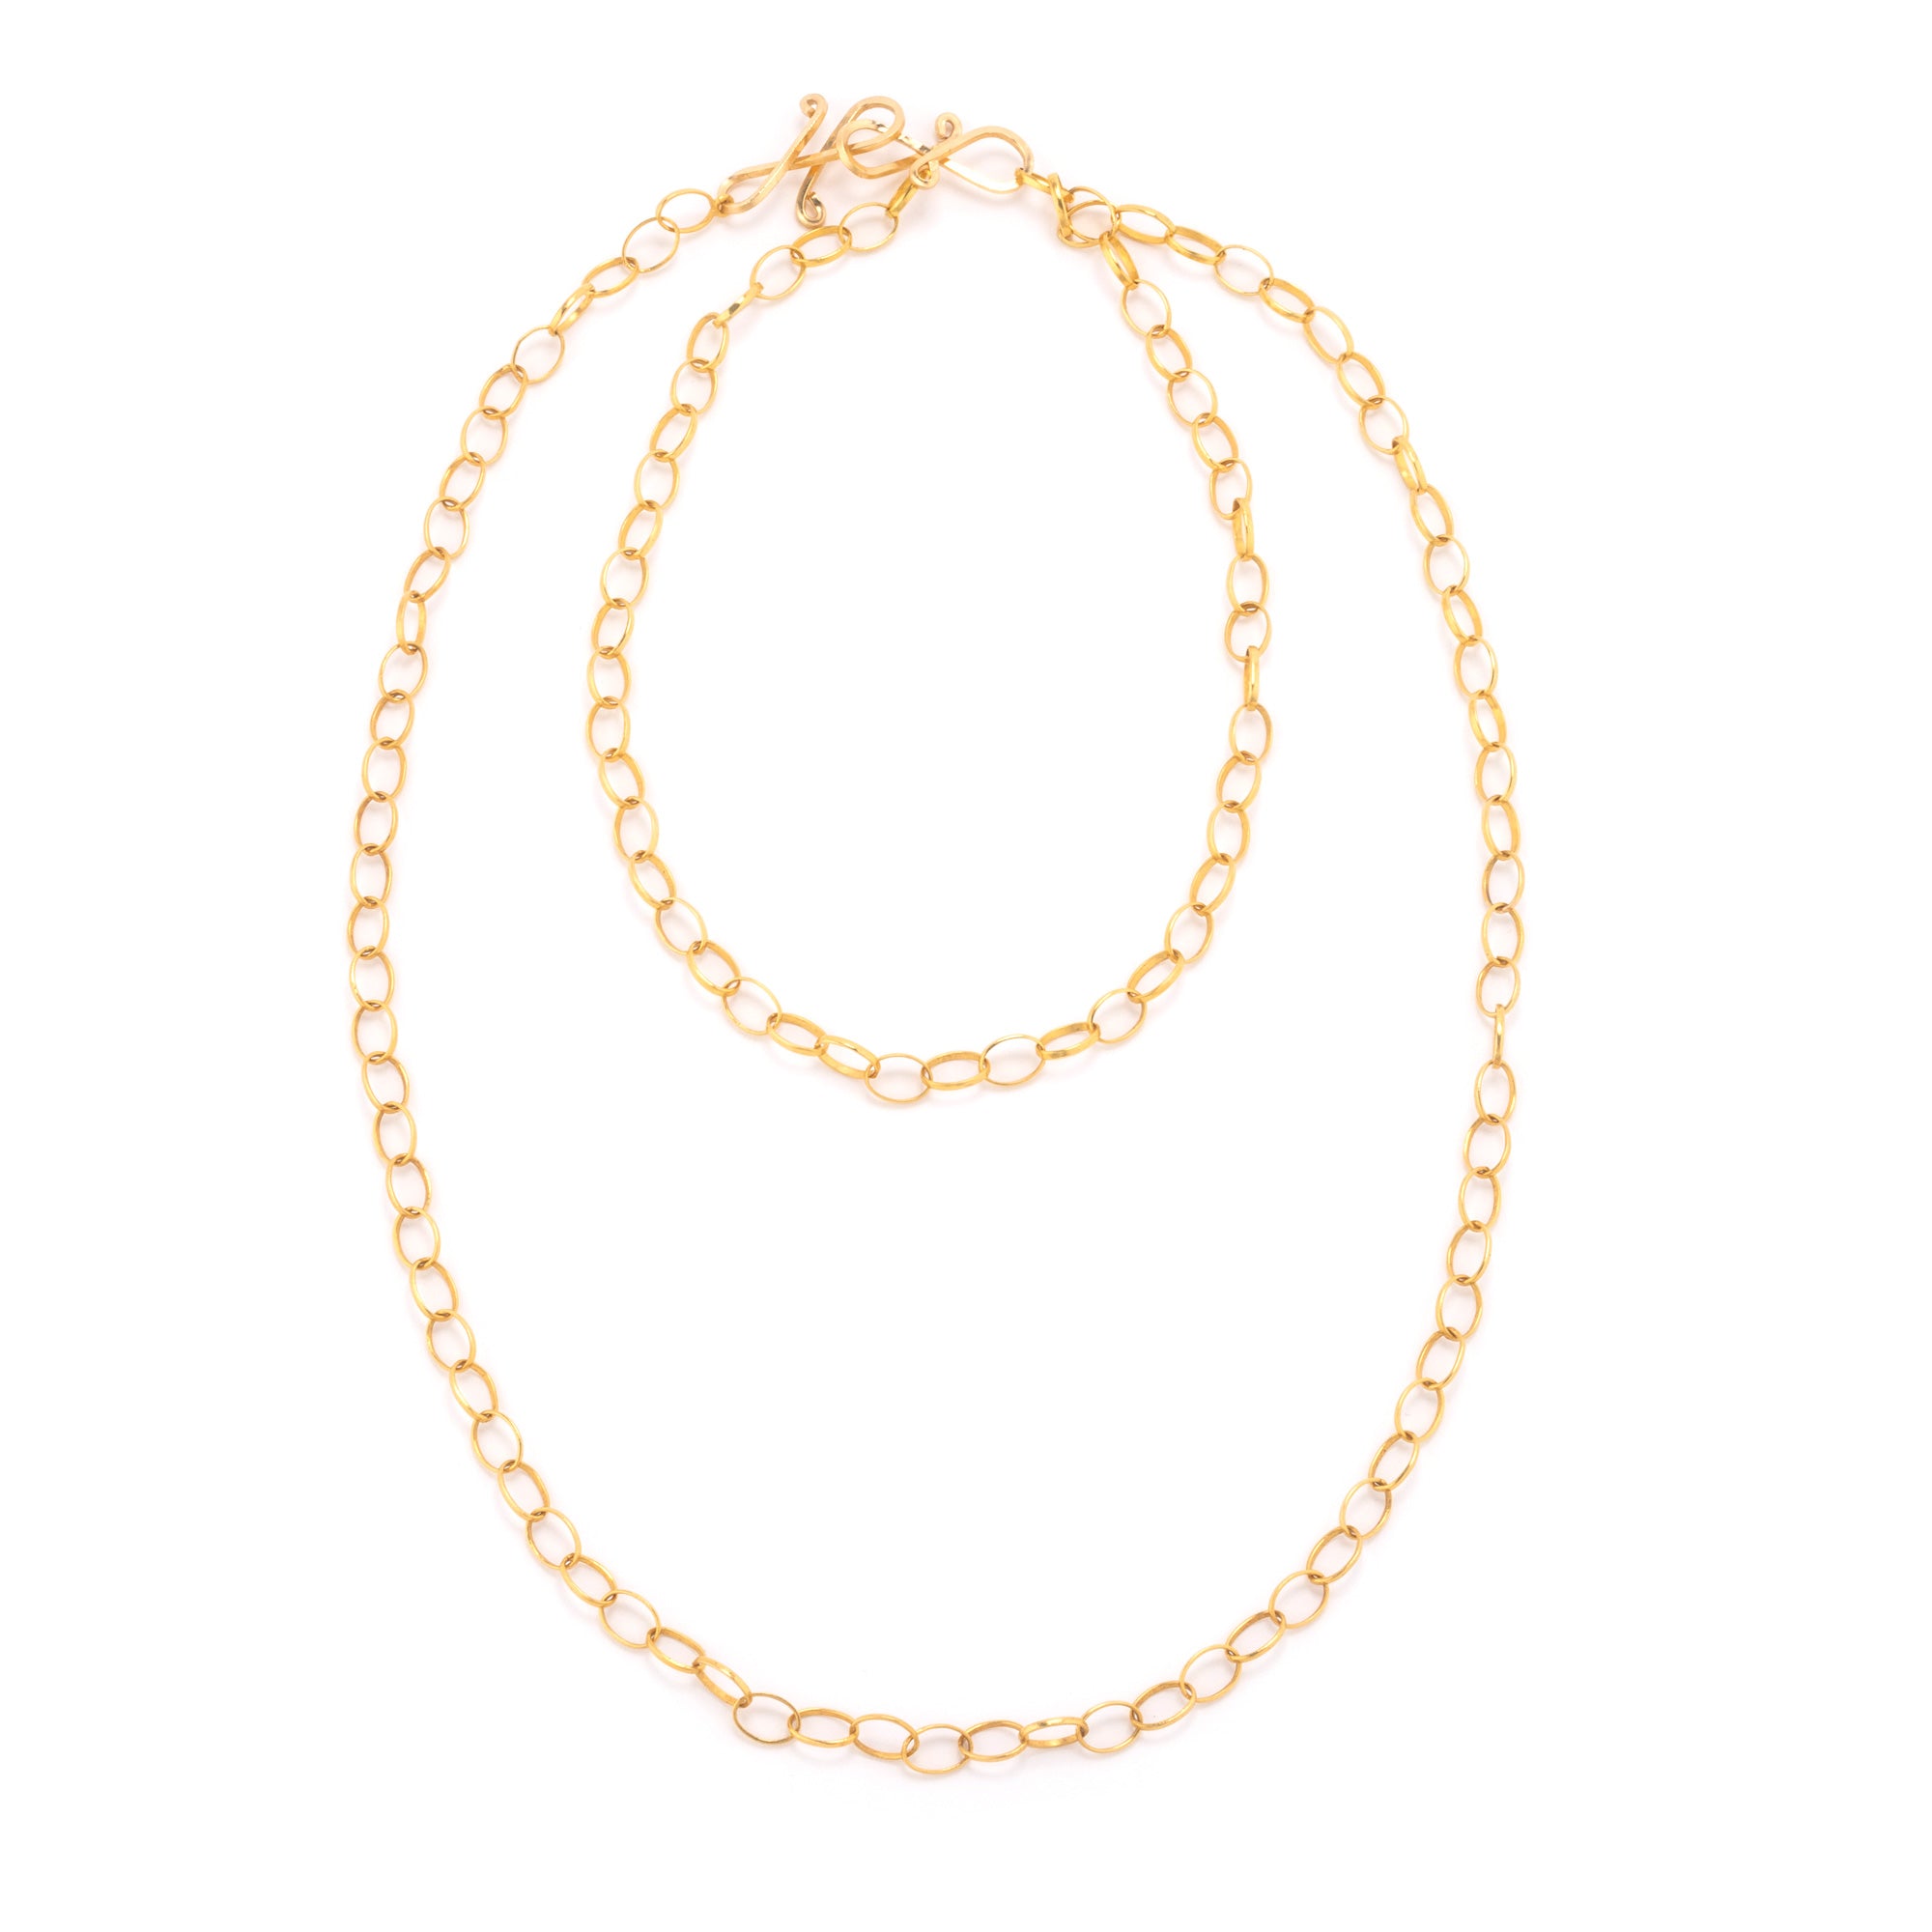 Open gold link necklace